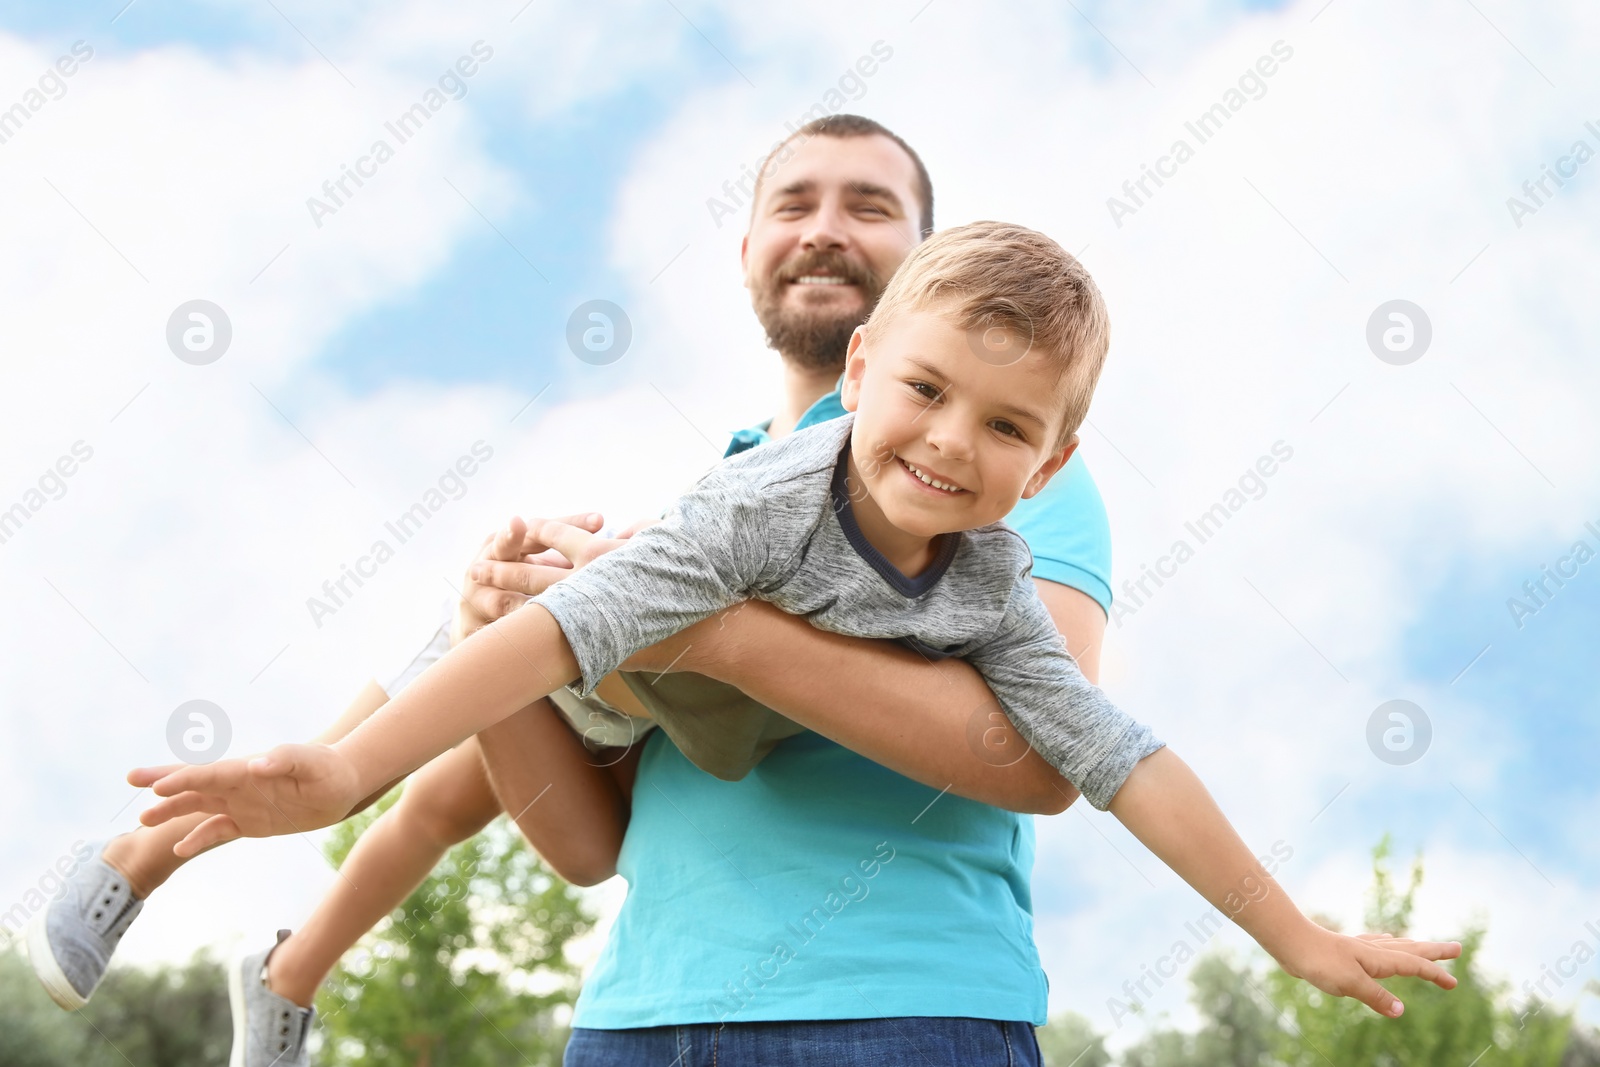 Photo of Man playing with his child outdoors. Happy family